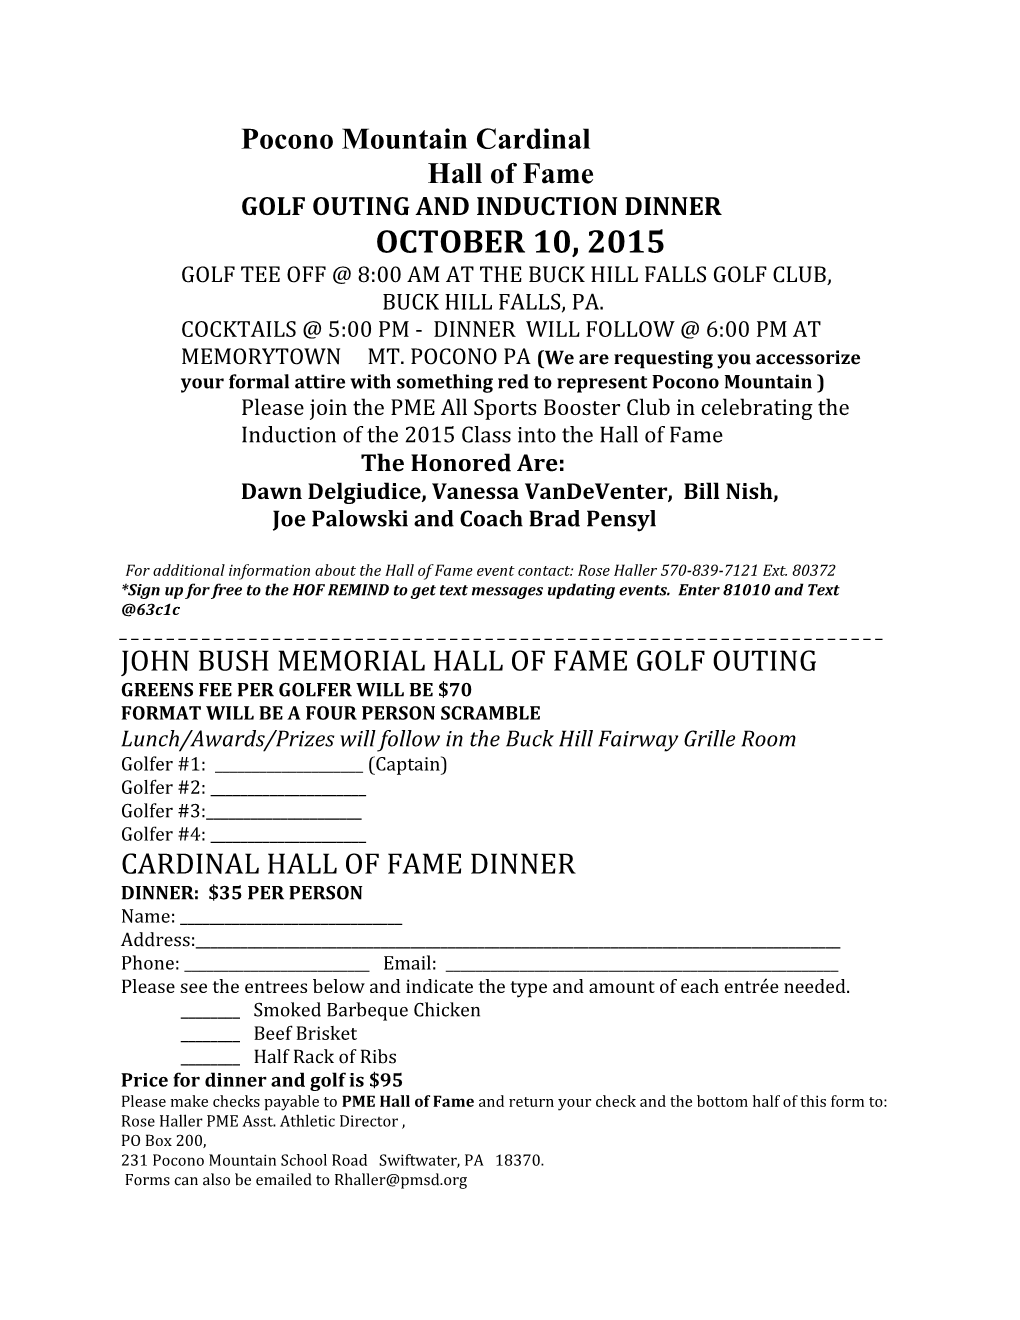 Golf Outing and Induction Dinner